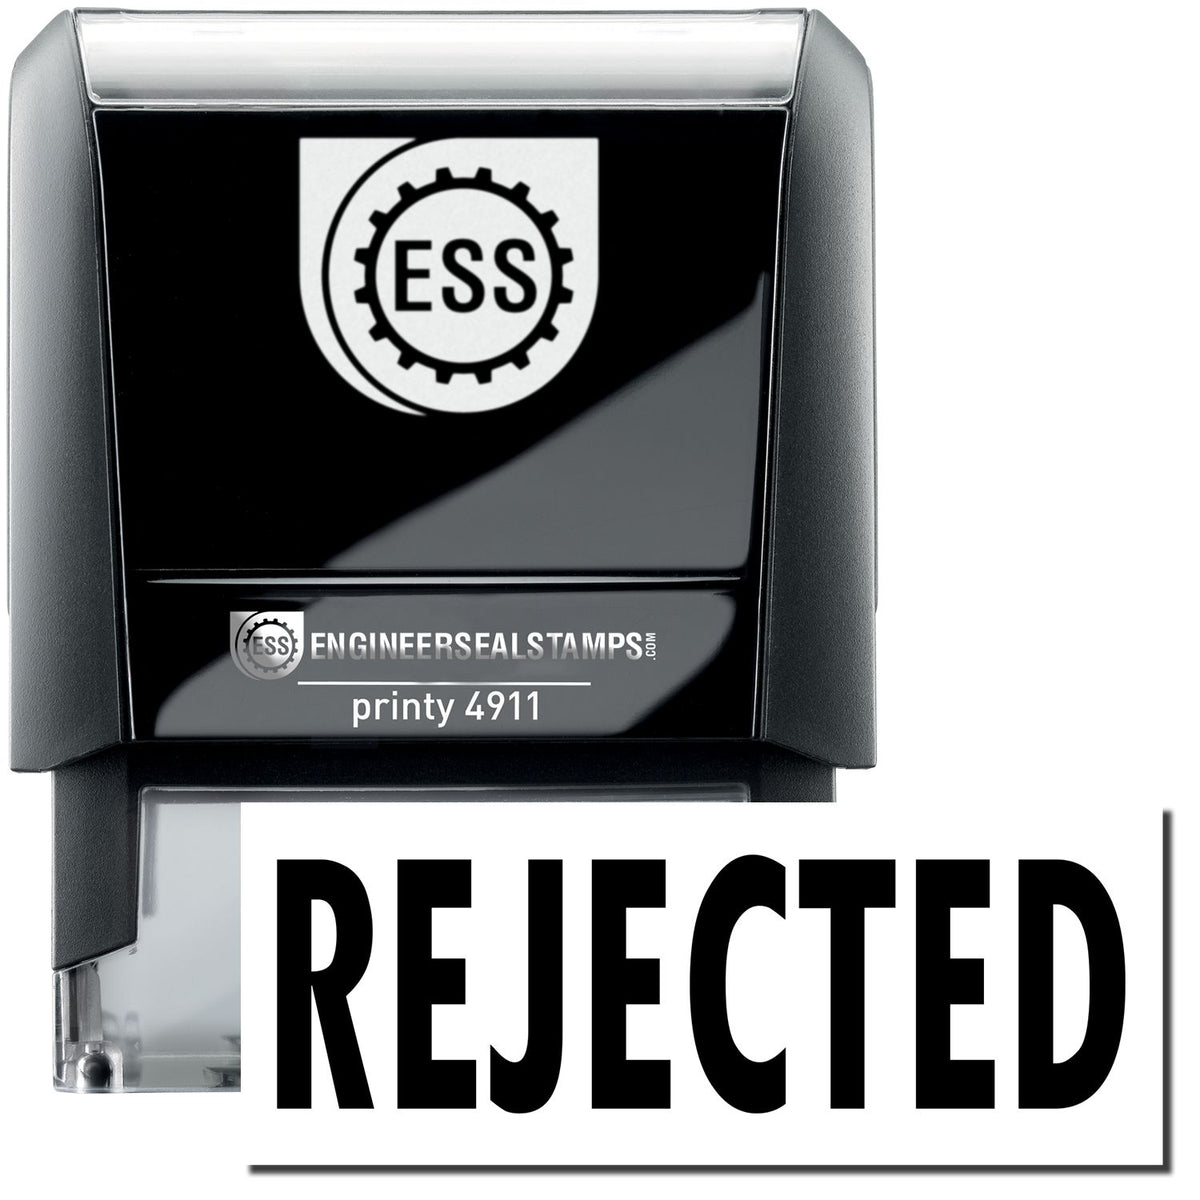 A self-inking stamp with a stamped image showing how the text &quot;REJECTED&quot; is displayed after stamping.